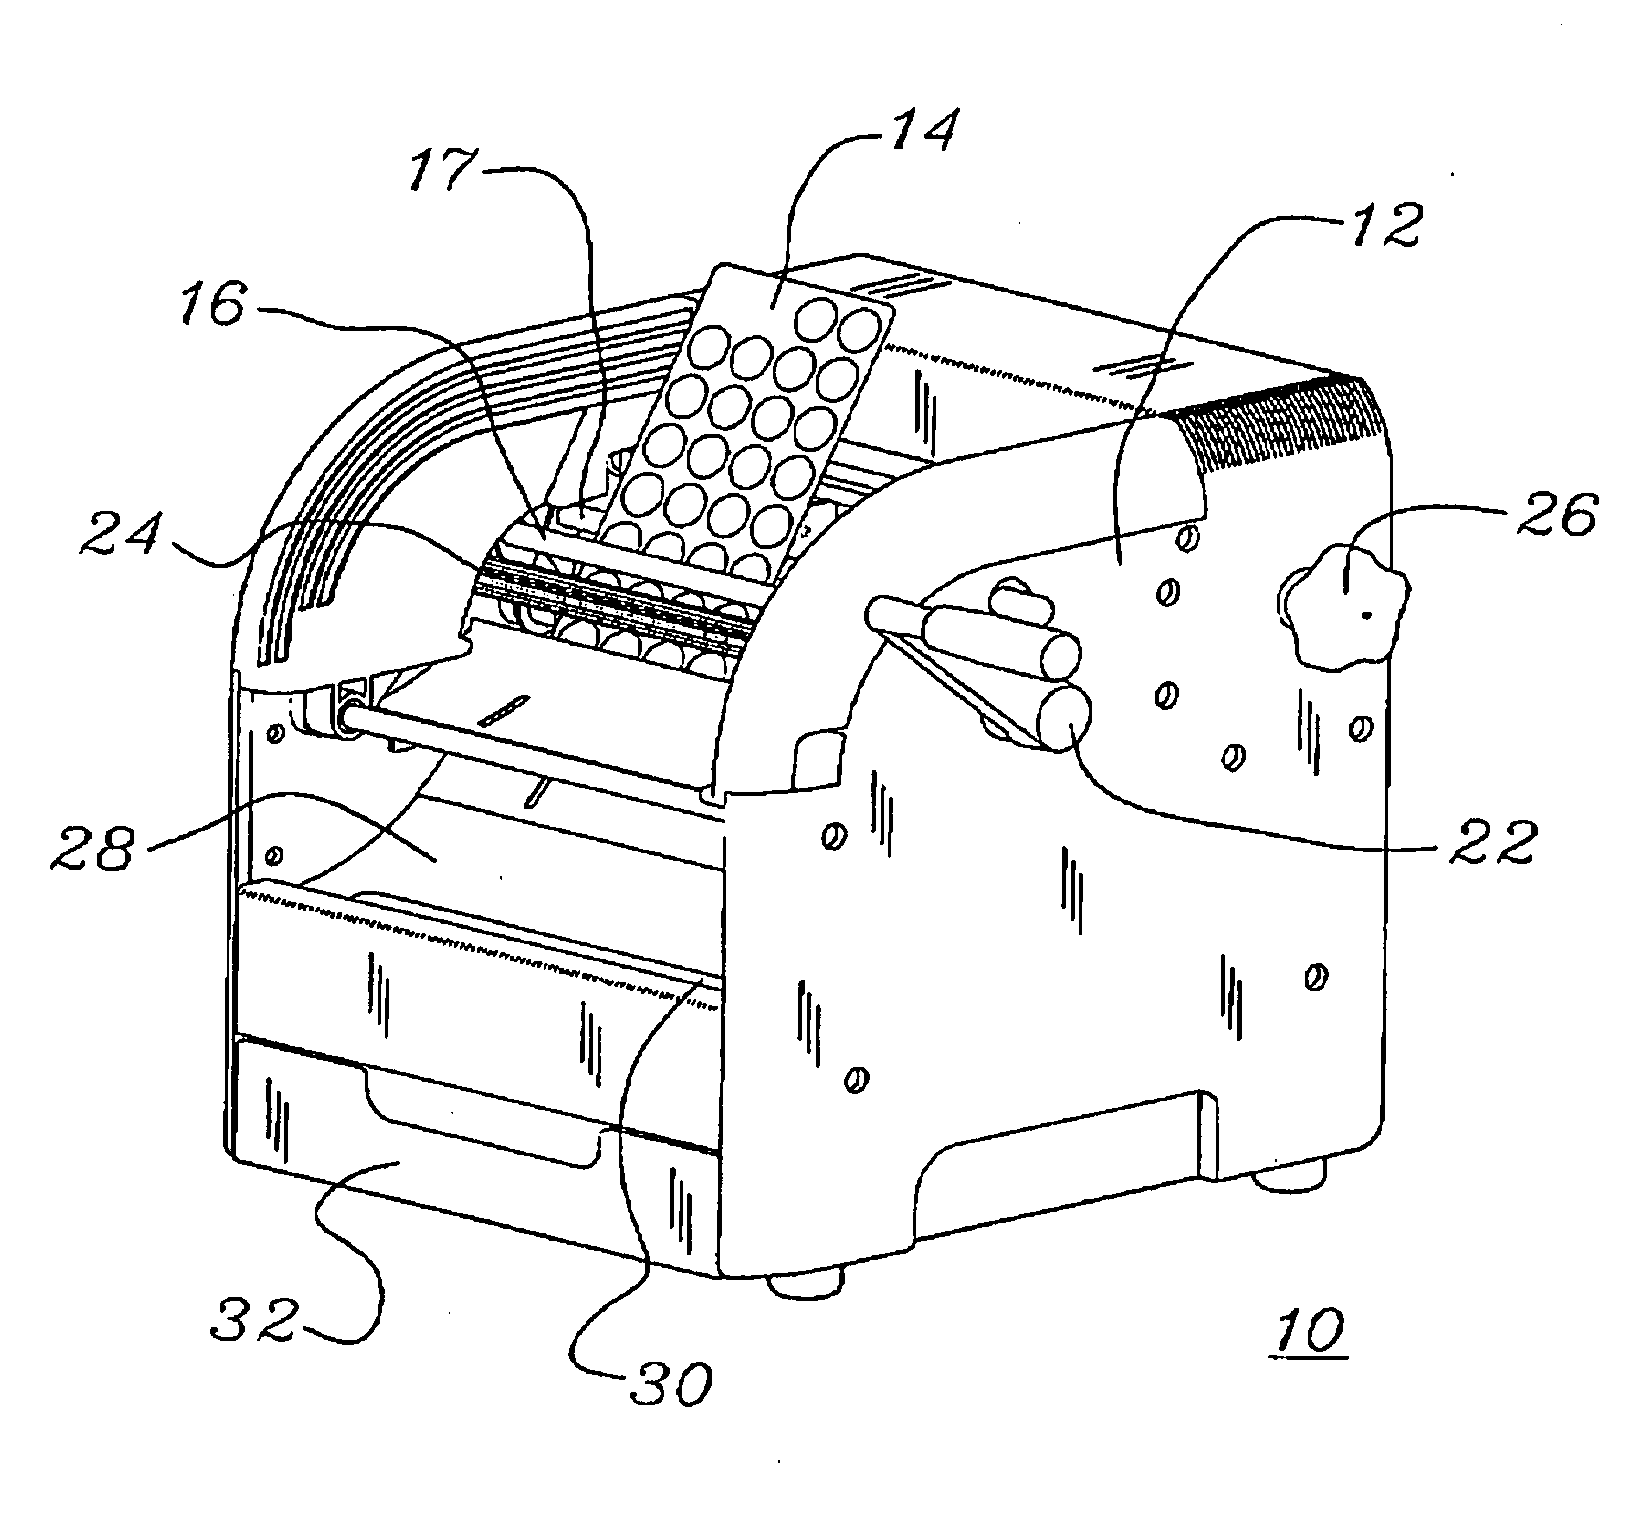 Systems and methods for removing medication from packaging